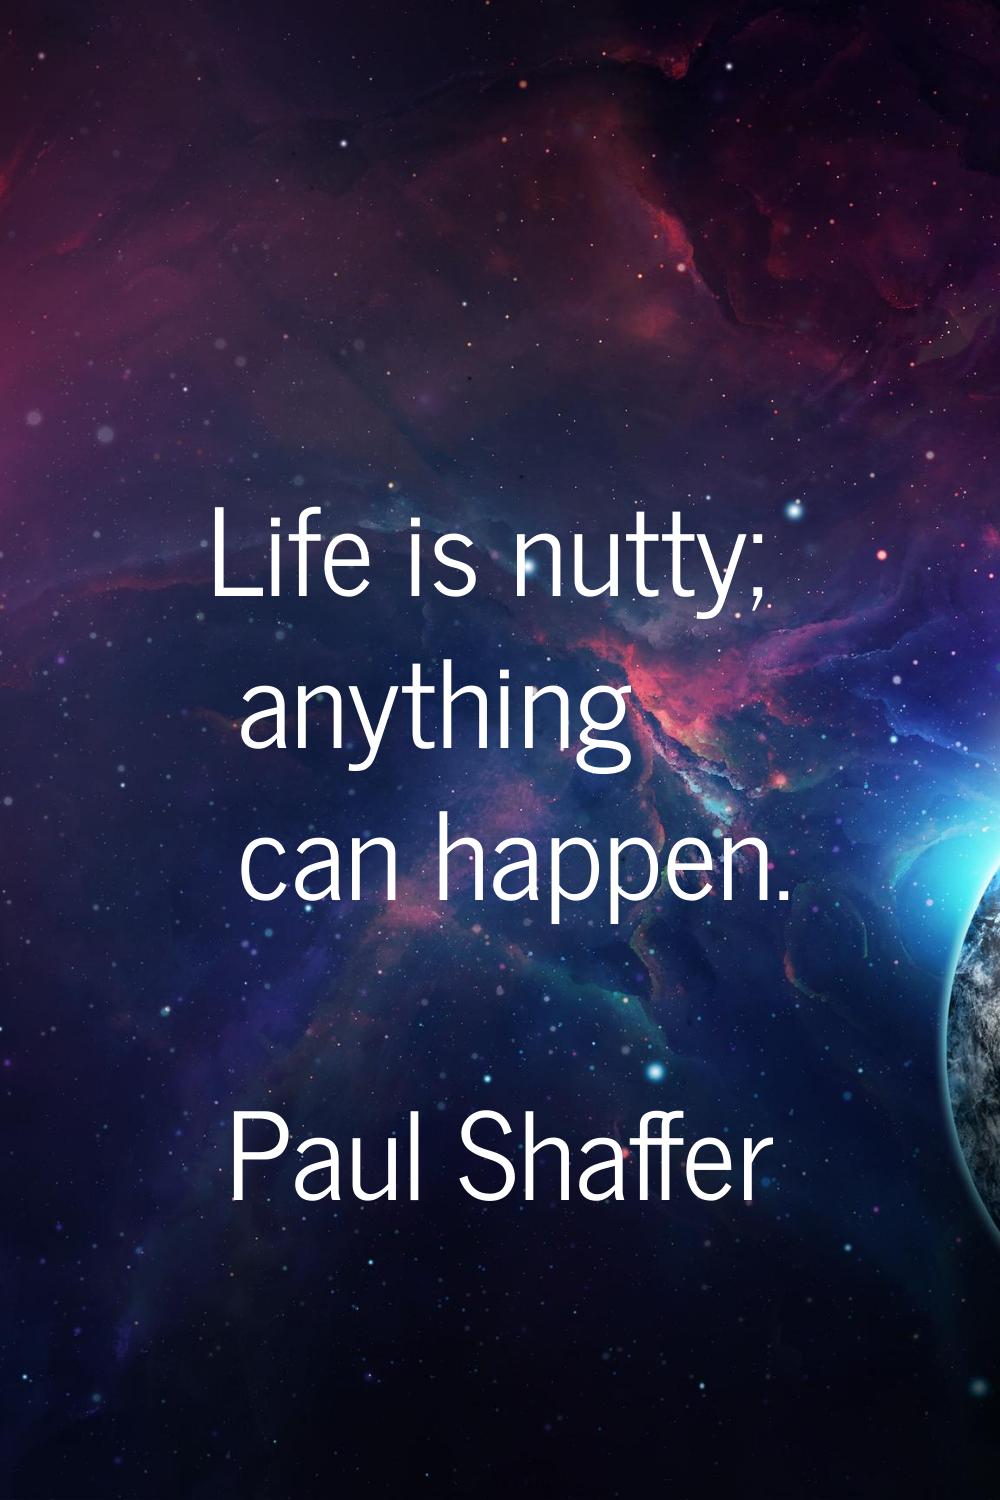 Life is nutty; anything can happen.